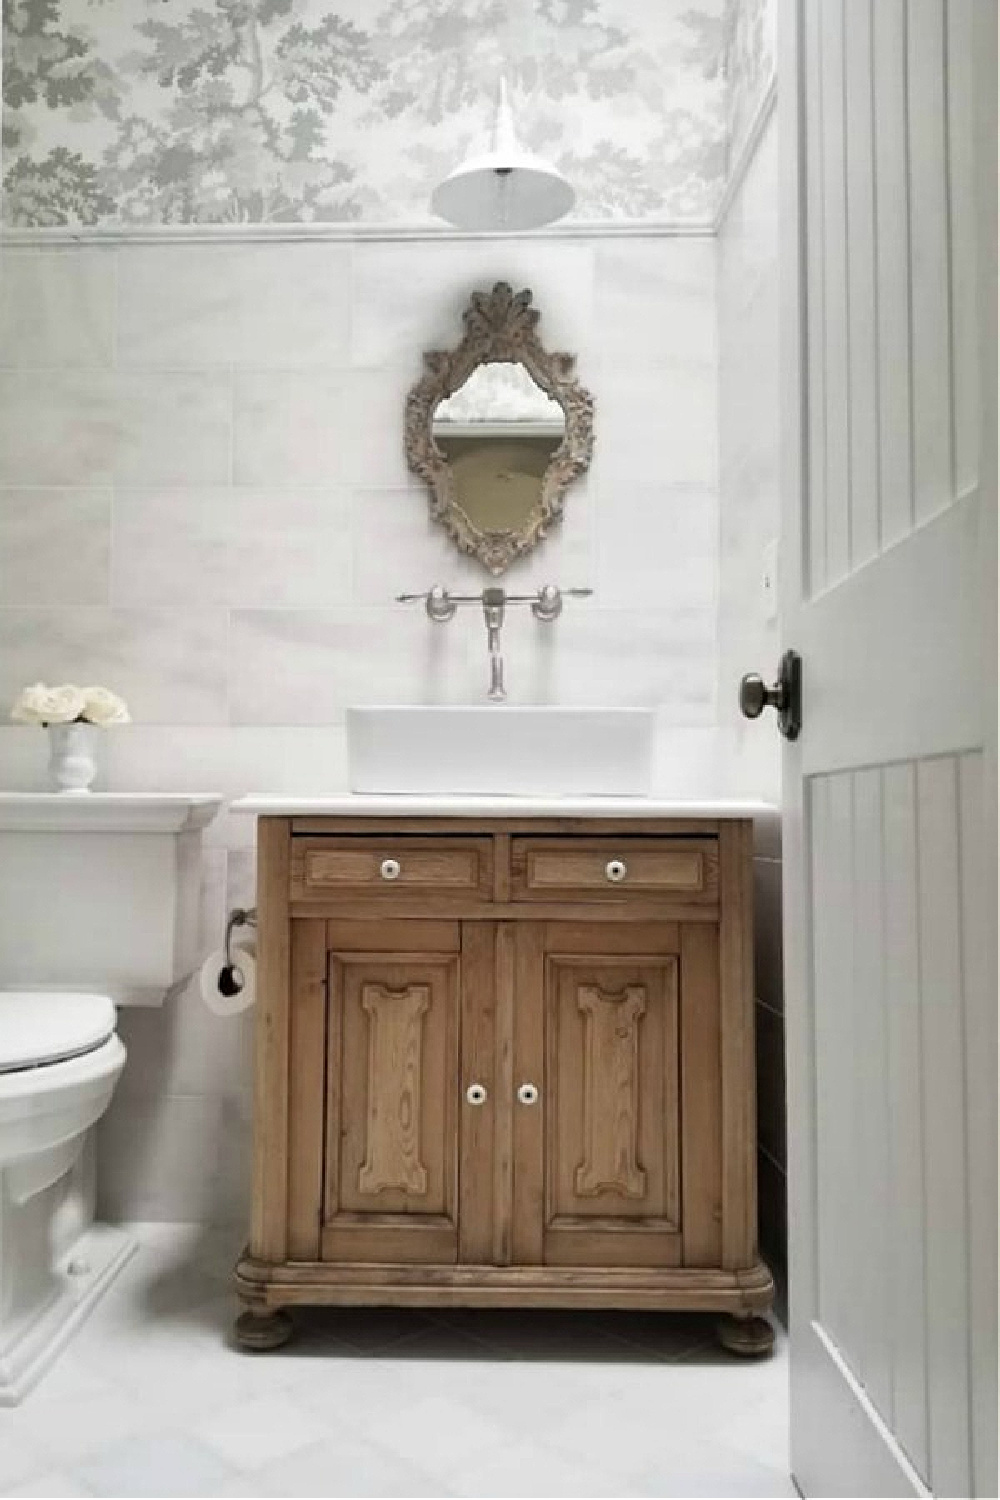 Pretty French country bathroom design with vessel sink and wall mount faucet - The French Nest Interior Design Co.